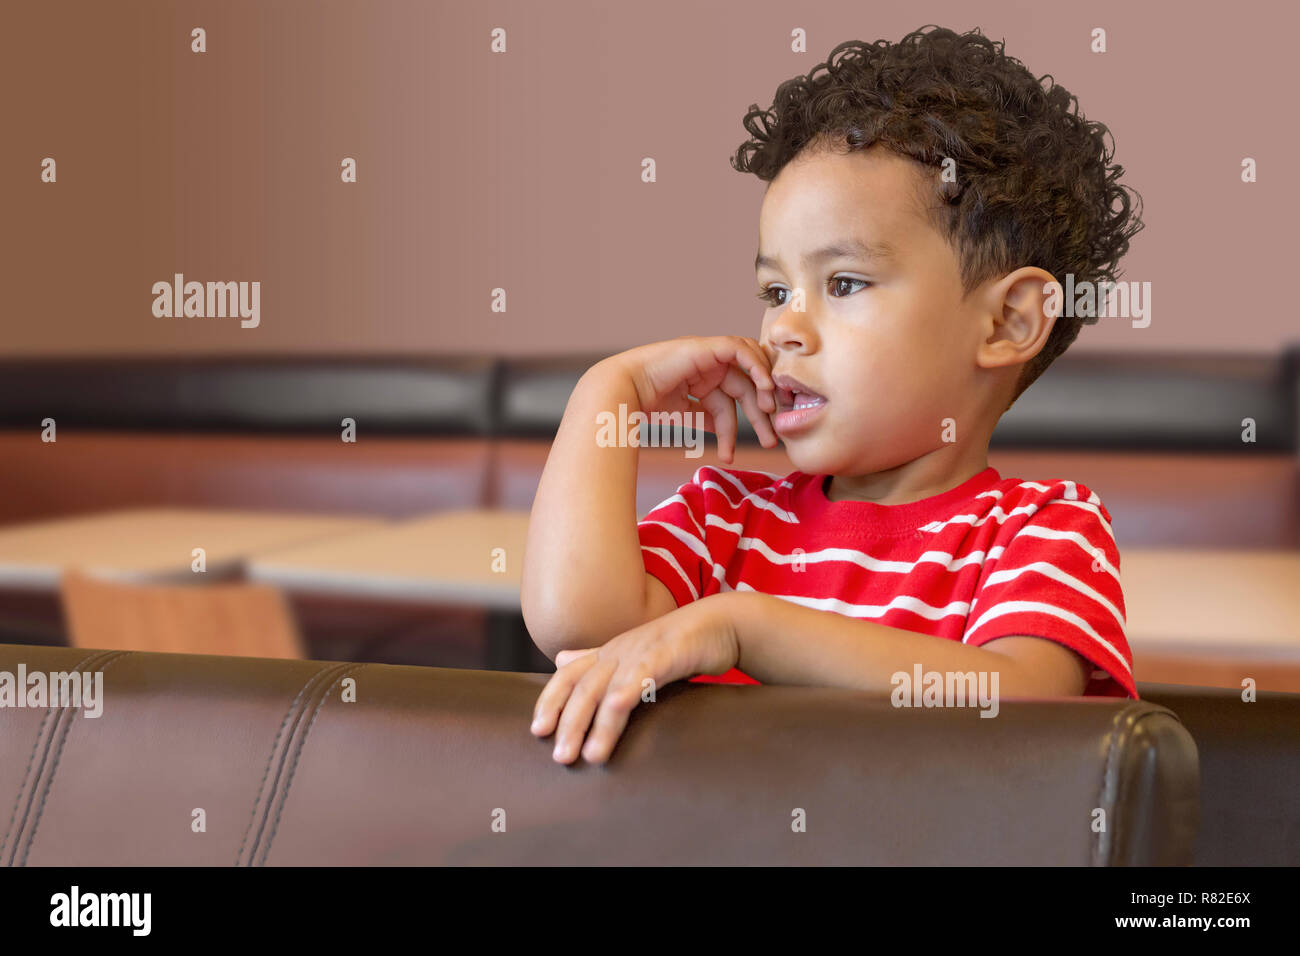 A curly hair young boy looks over the booth seat at a coffee shop. Something at a distance captures the attention of this little boy. Stock Photo